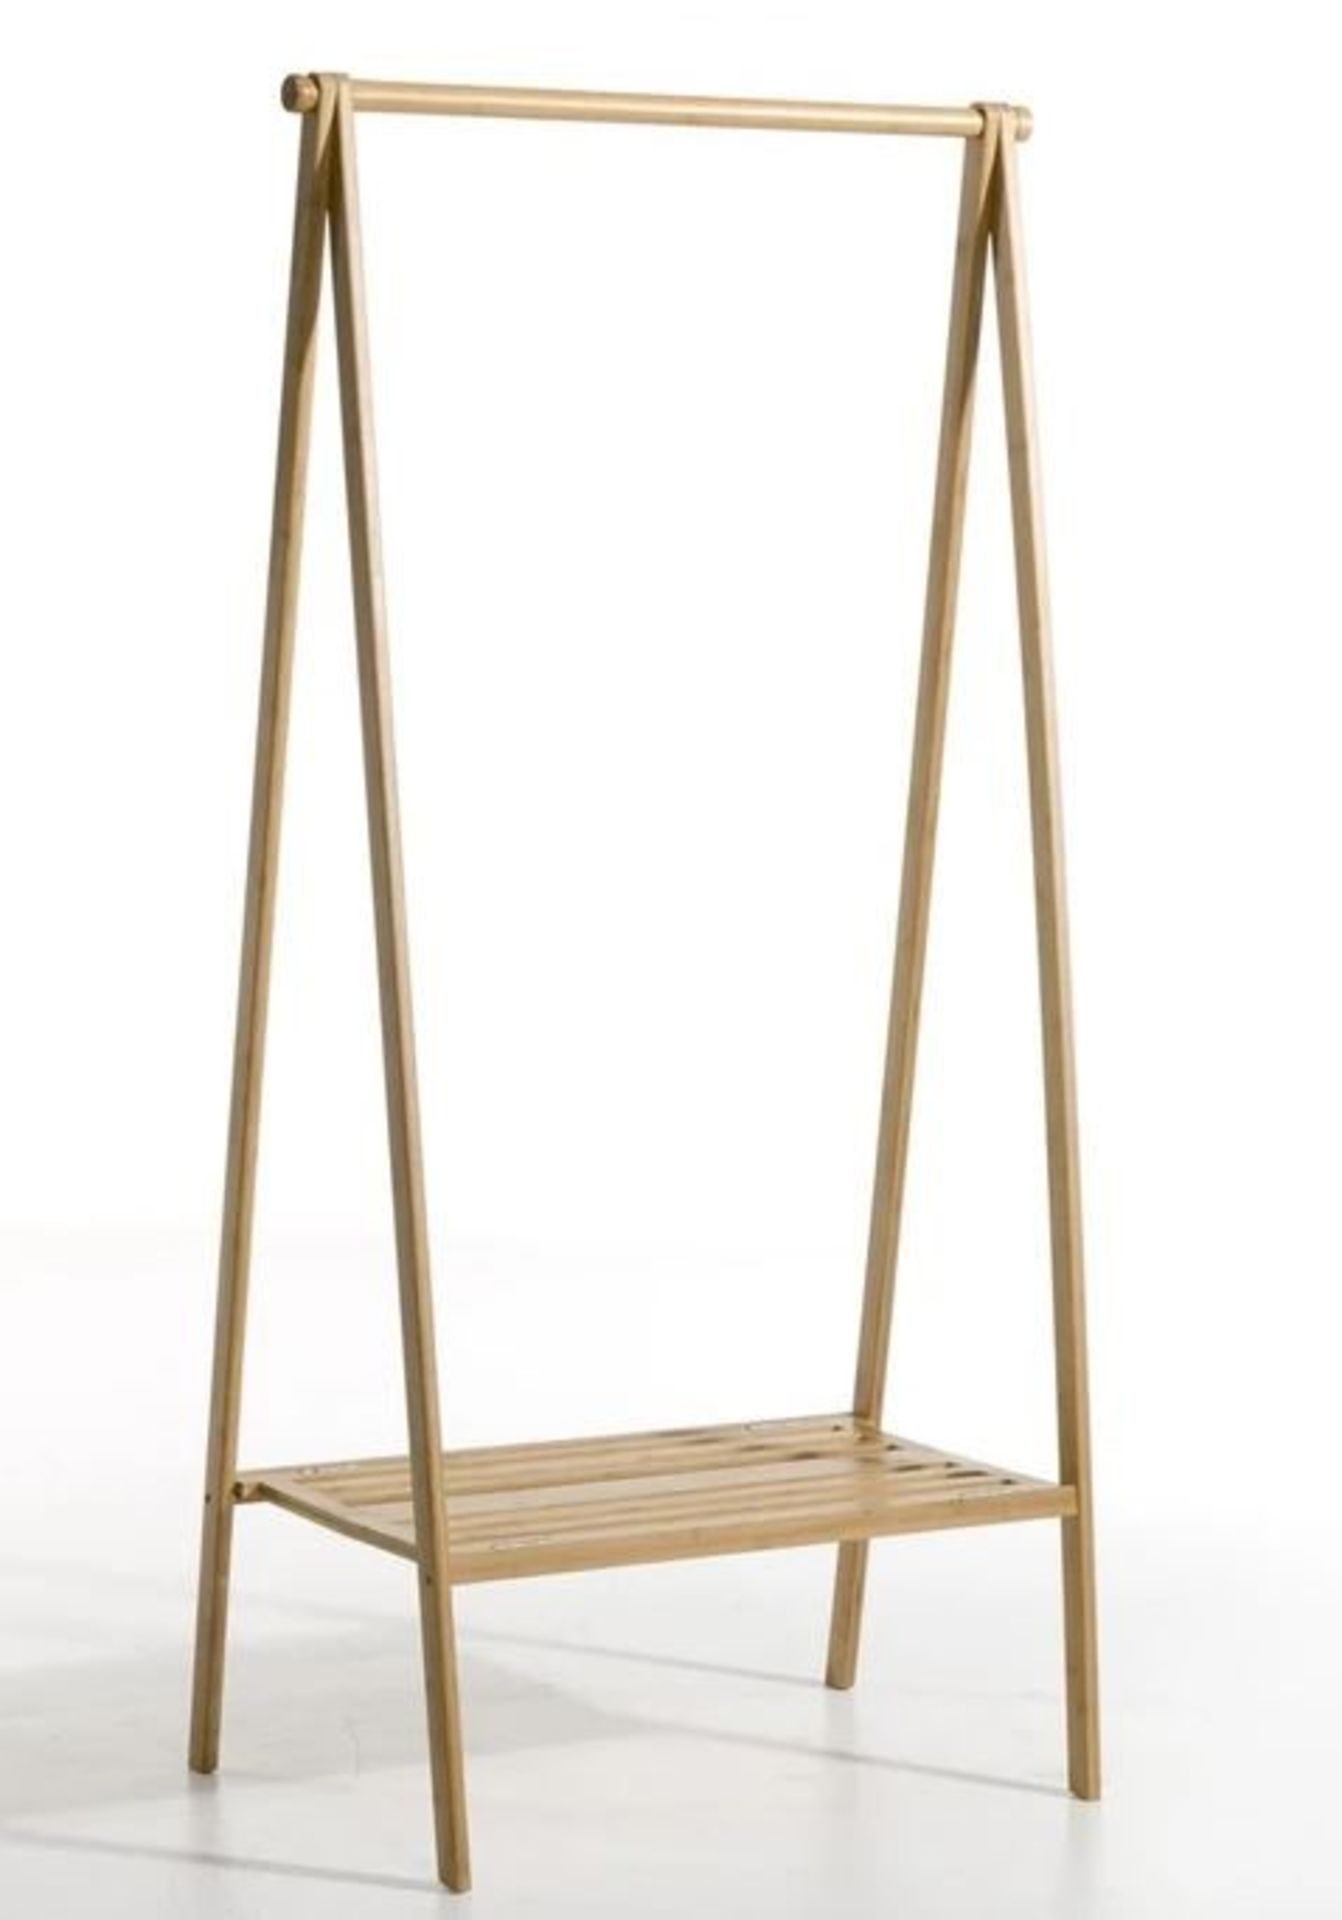 LA REDOUTE BAMBOO FOLDING CLOTHES RACK WITH SHELF